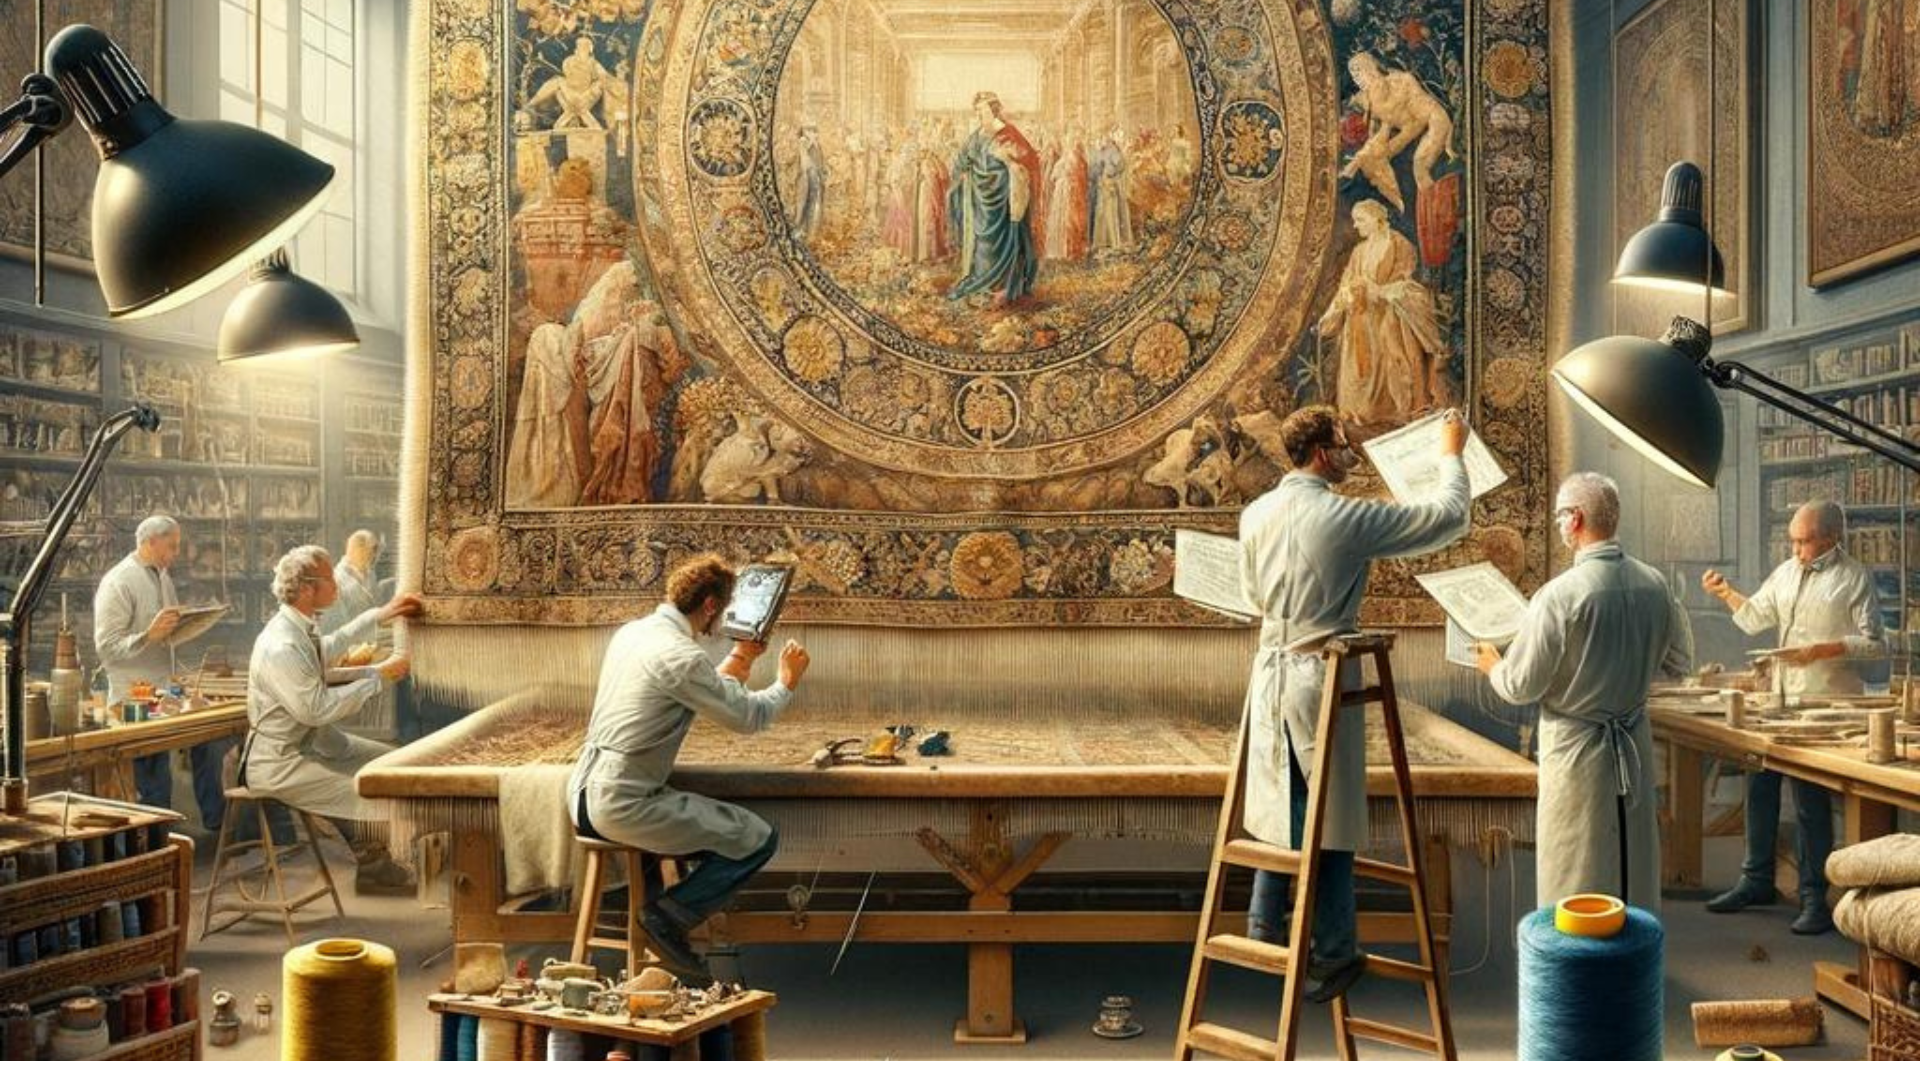 A detailed view of a tapestry restoration workshop with restorers meticulously working on an ancient tapestry, surrounded by tools and materials for repair.